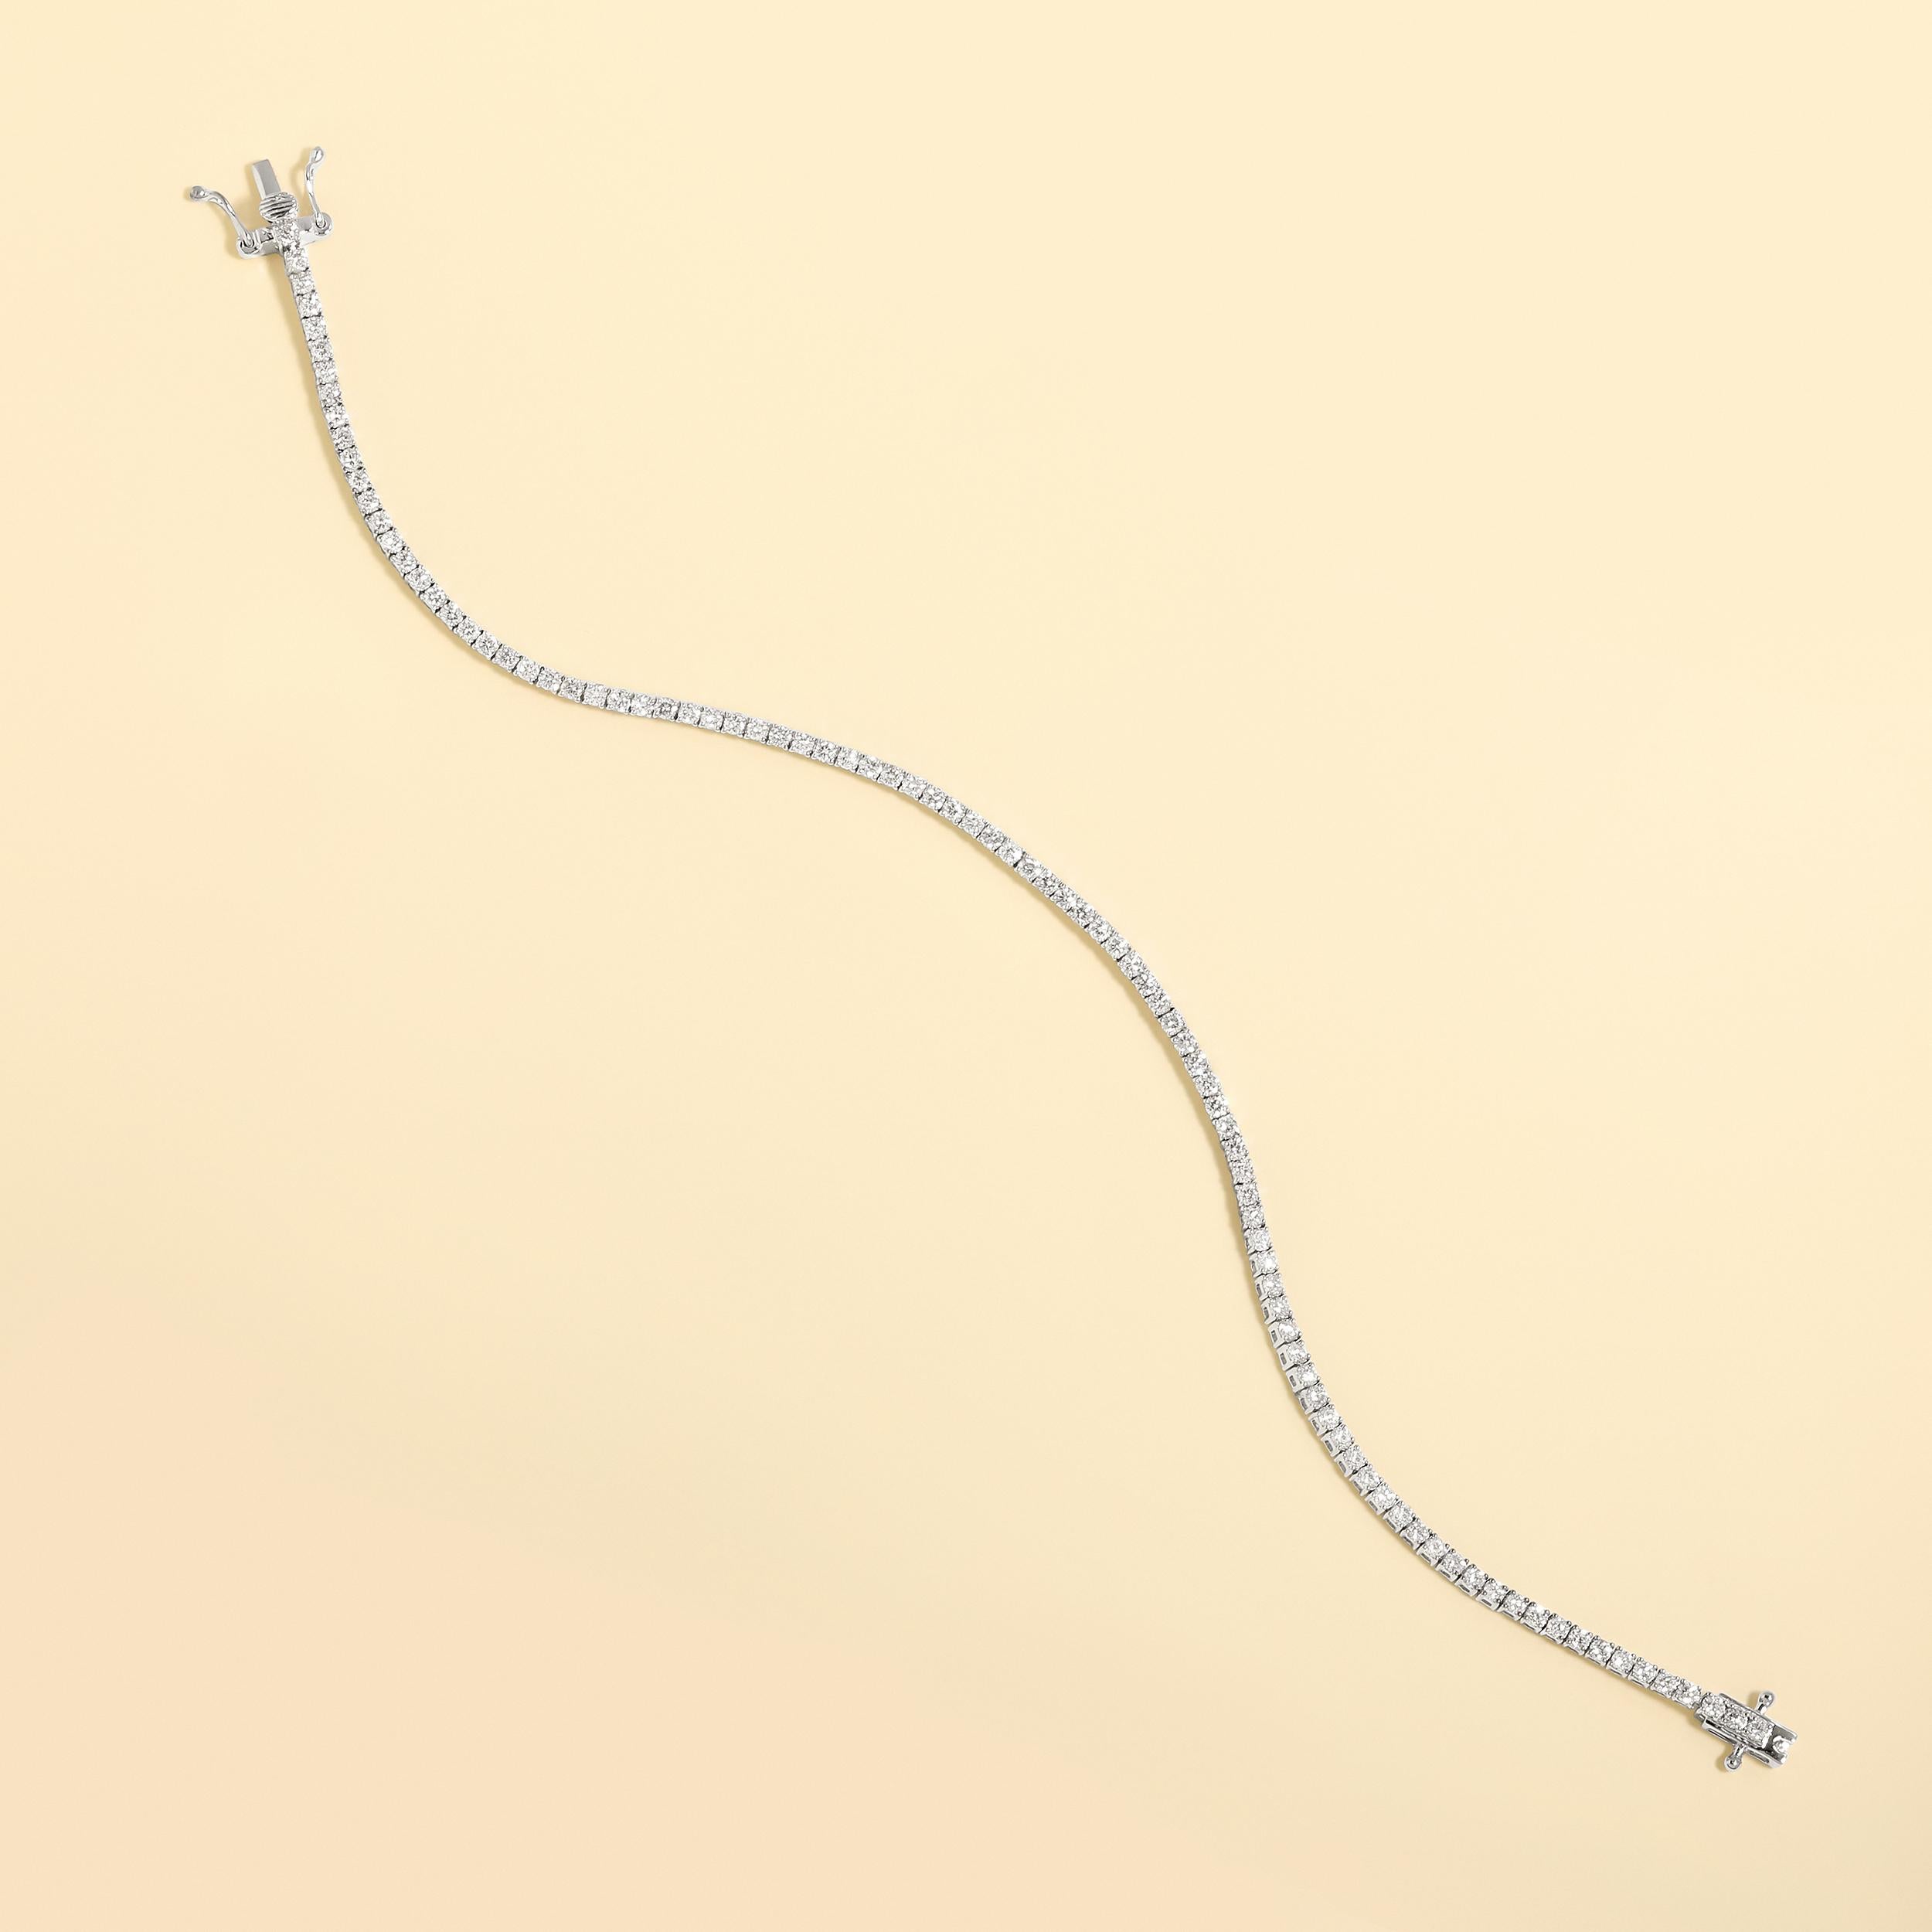 Crafted in 5.45 grams of 14K White Gold, the bracelet contains 95 stones of Round Natural Diamonds with a total of 1.98 carat in G-H color and VS-SI clarity. The bracelet length is 7 inches.

CONTEMPORARY AND TIMELESS ESSENCE: Crafted in